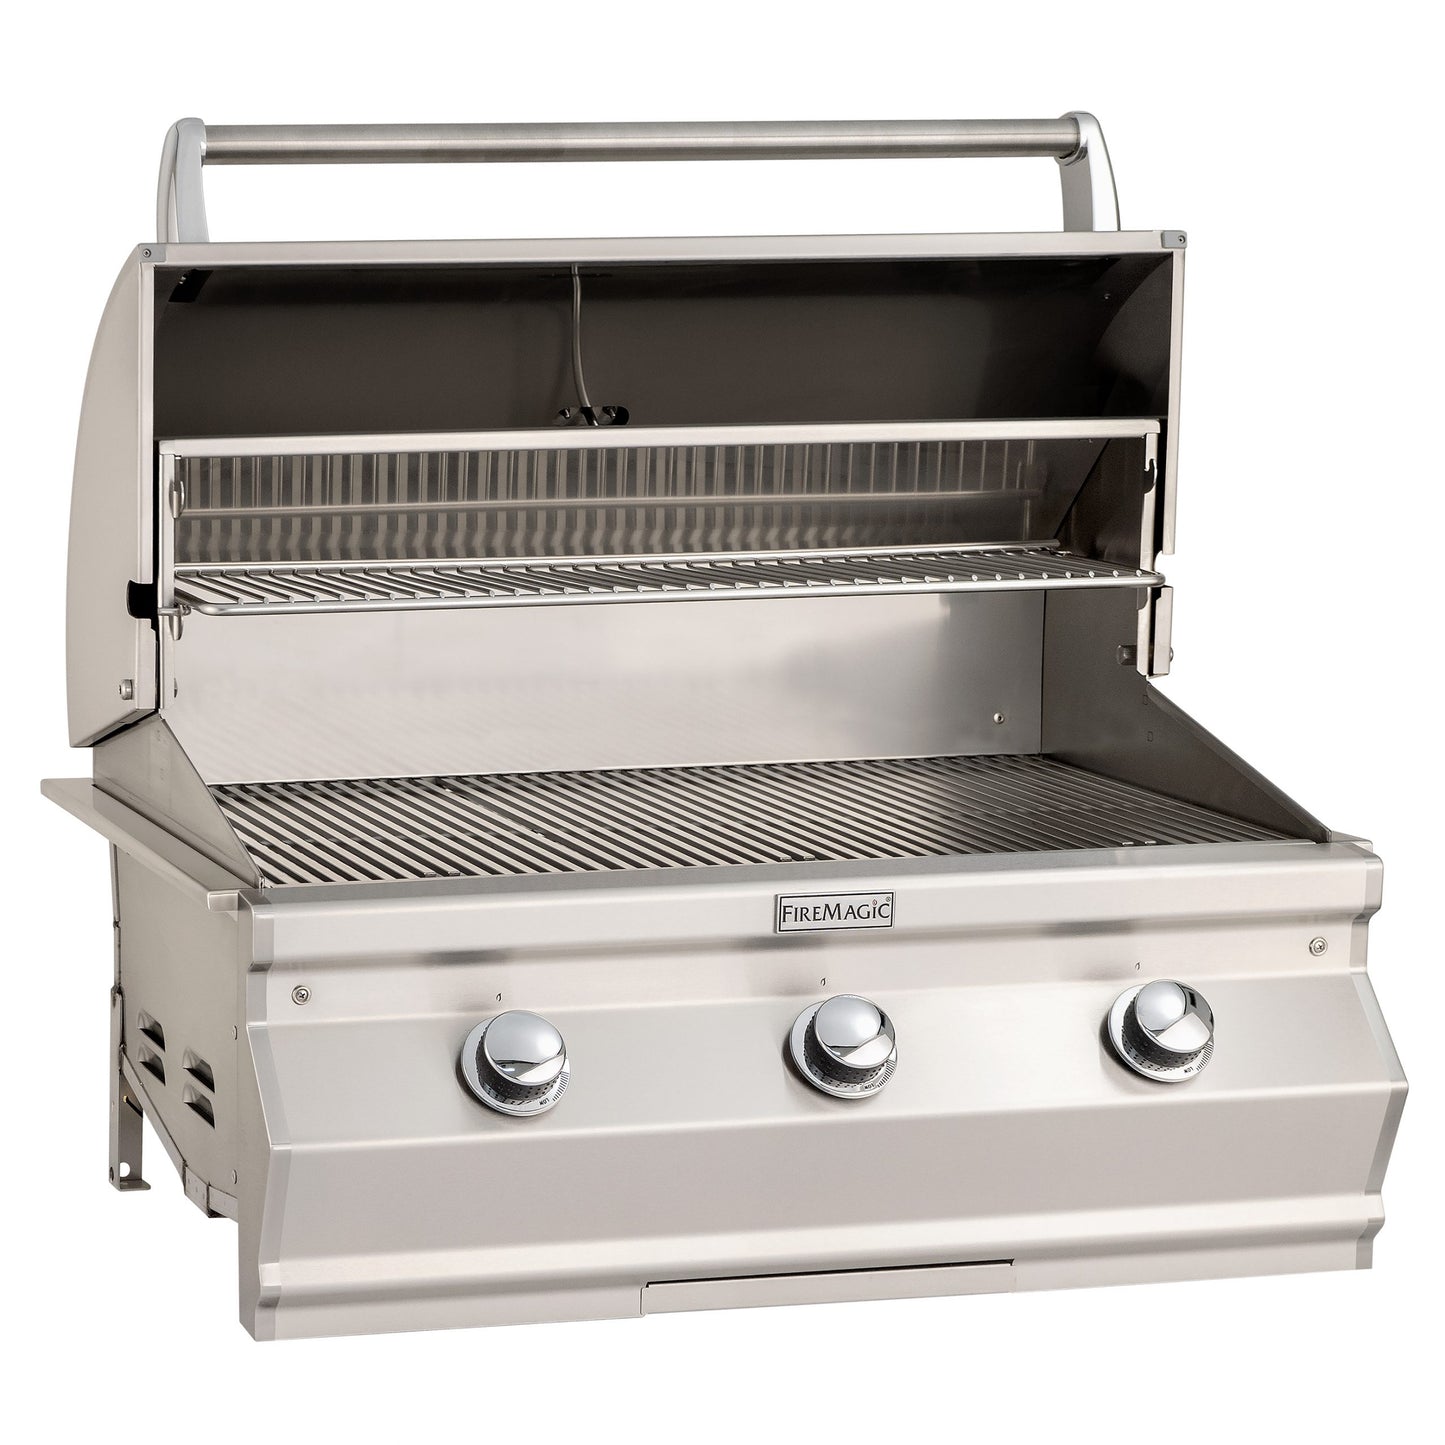 Fire Magic Choice C540i Built-in 30 in. Grill